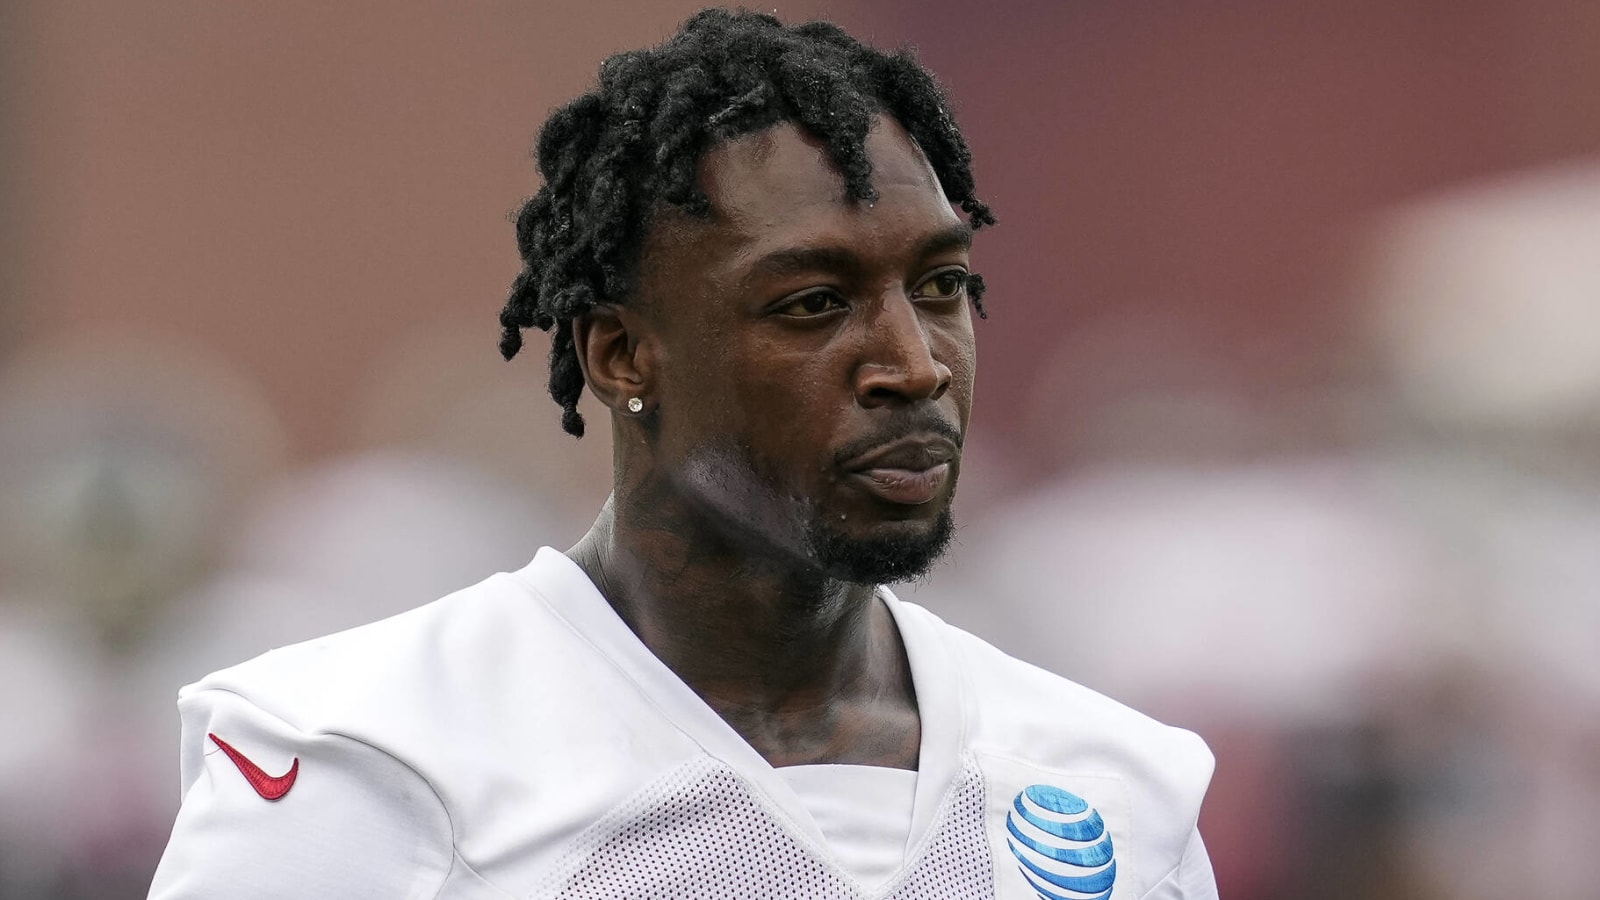 Calvin Ridley suspended indefinitely for gambling on games